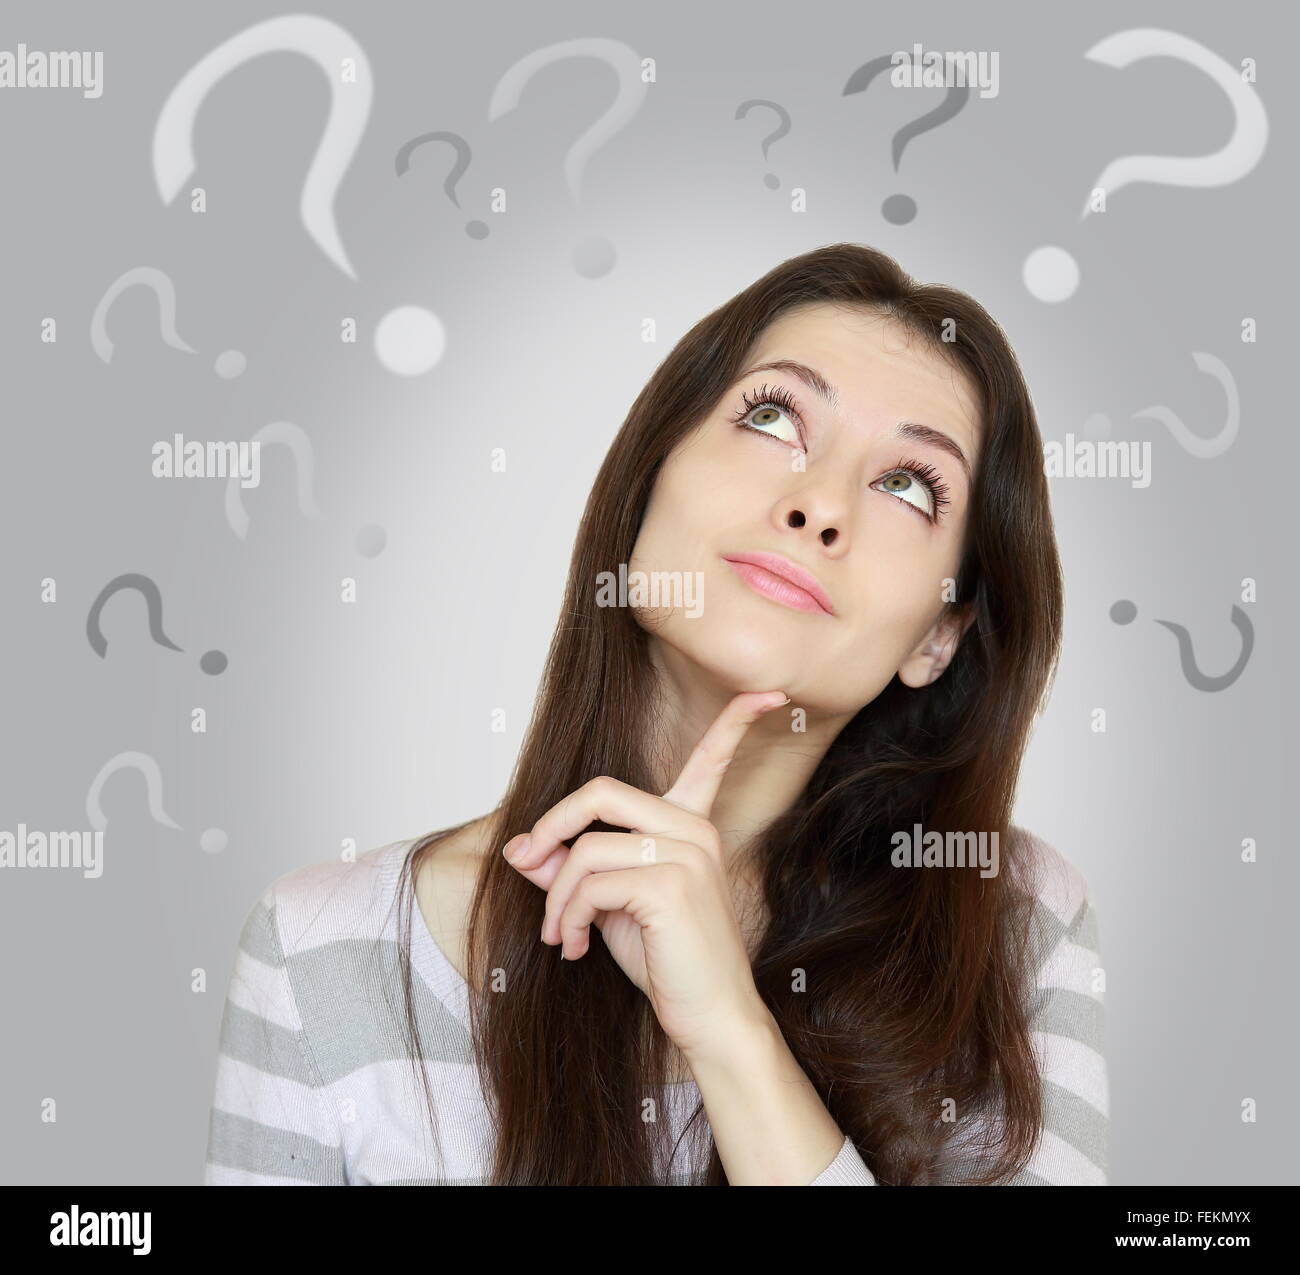 Beautiful girl with questions thinks above her head looking up isolated on grey background Stock Photo